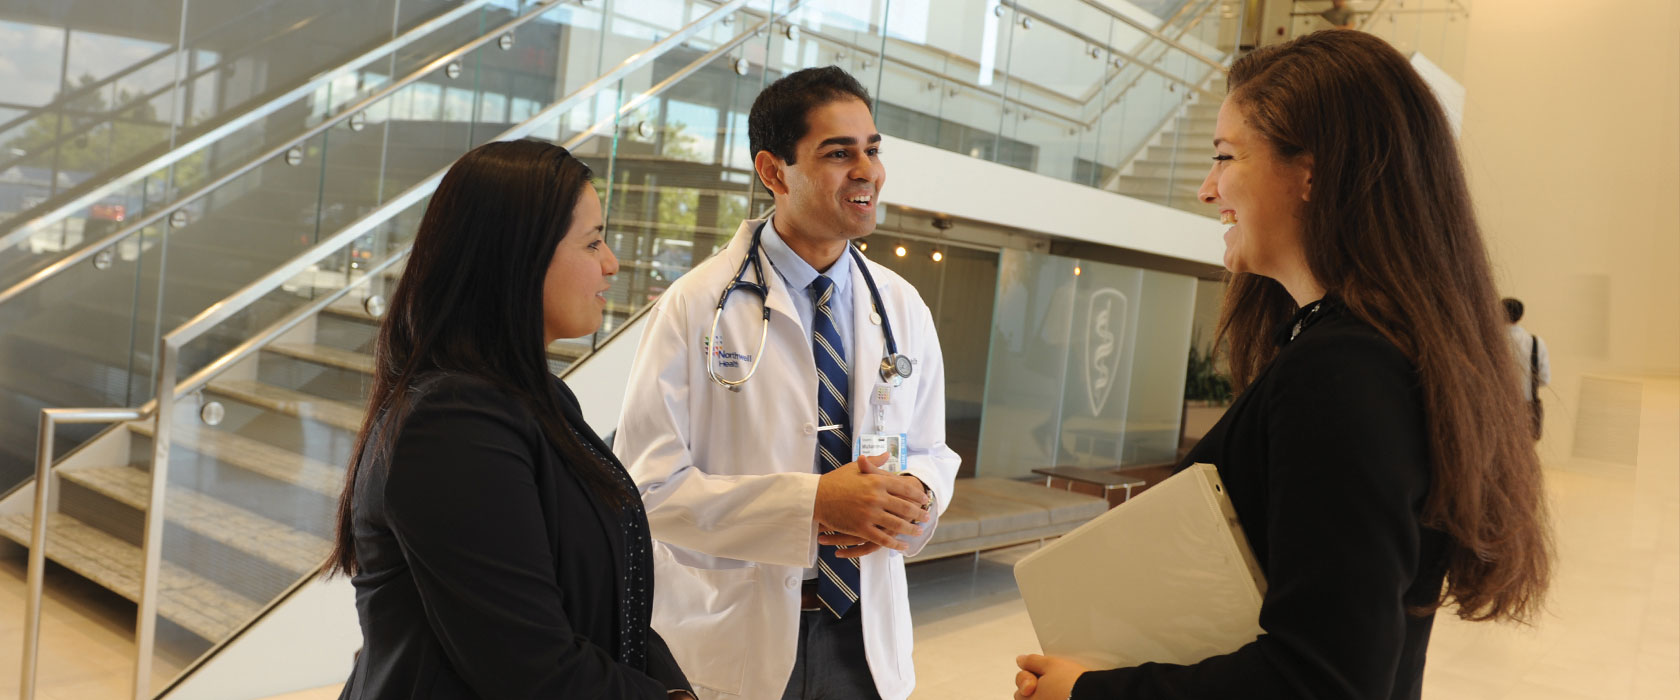 Health Law Students Talking with a Medical School Student